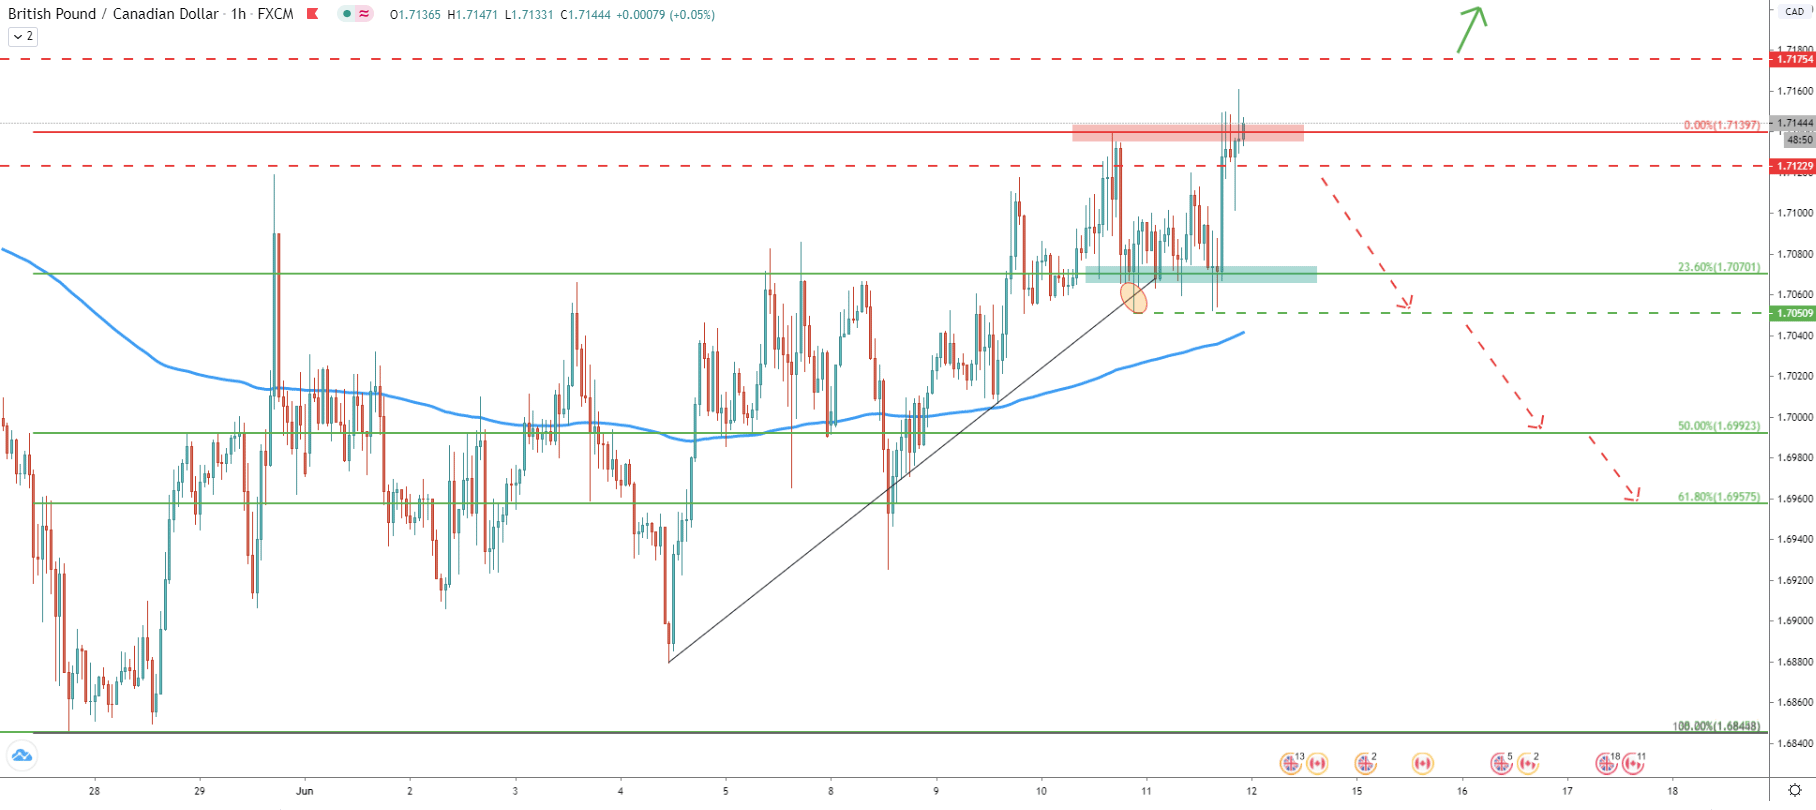 GBP/CAD 1-Hour Technical Analysis 11 June 2020